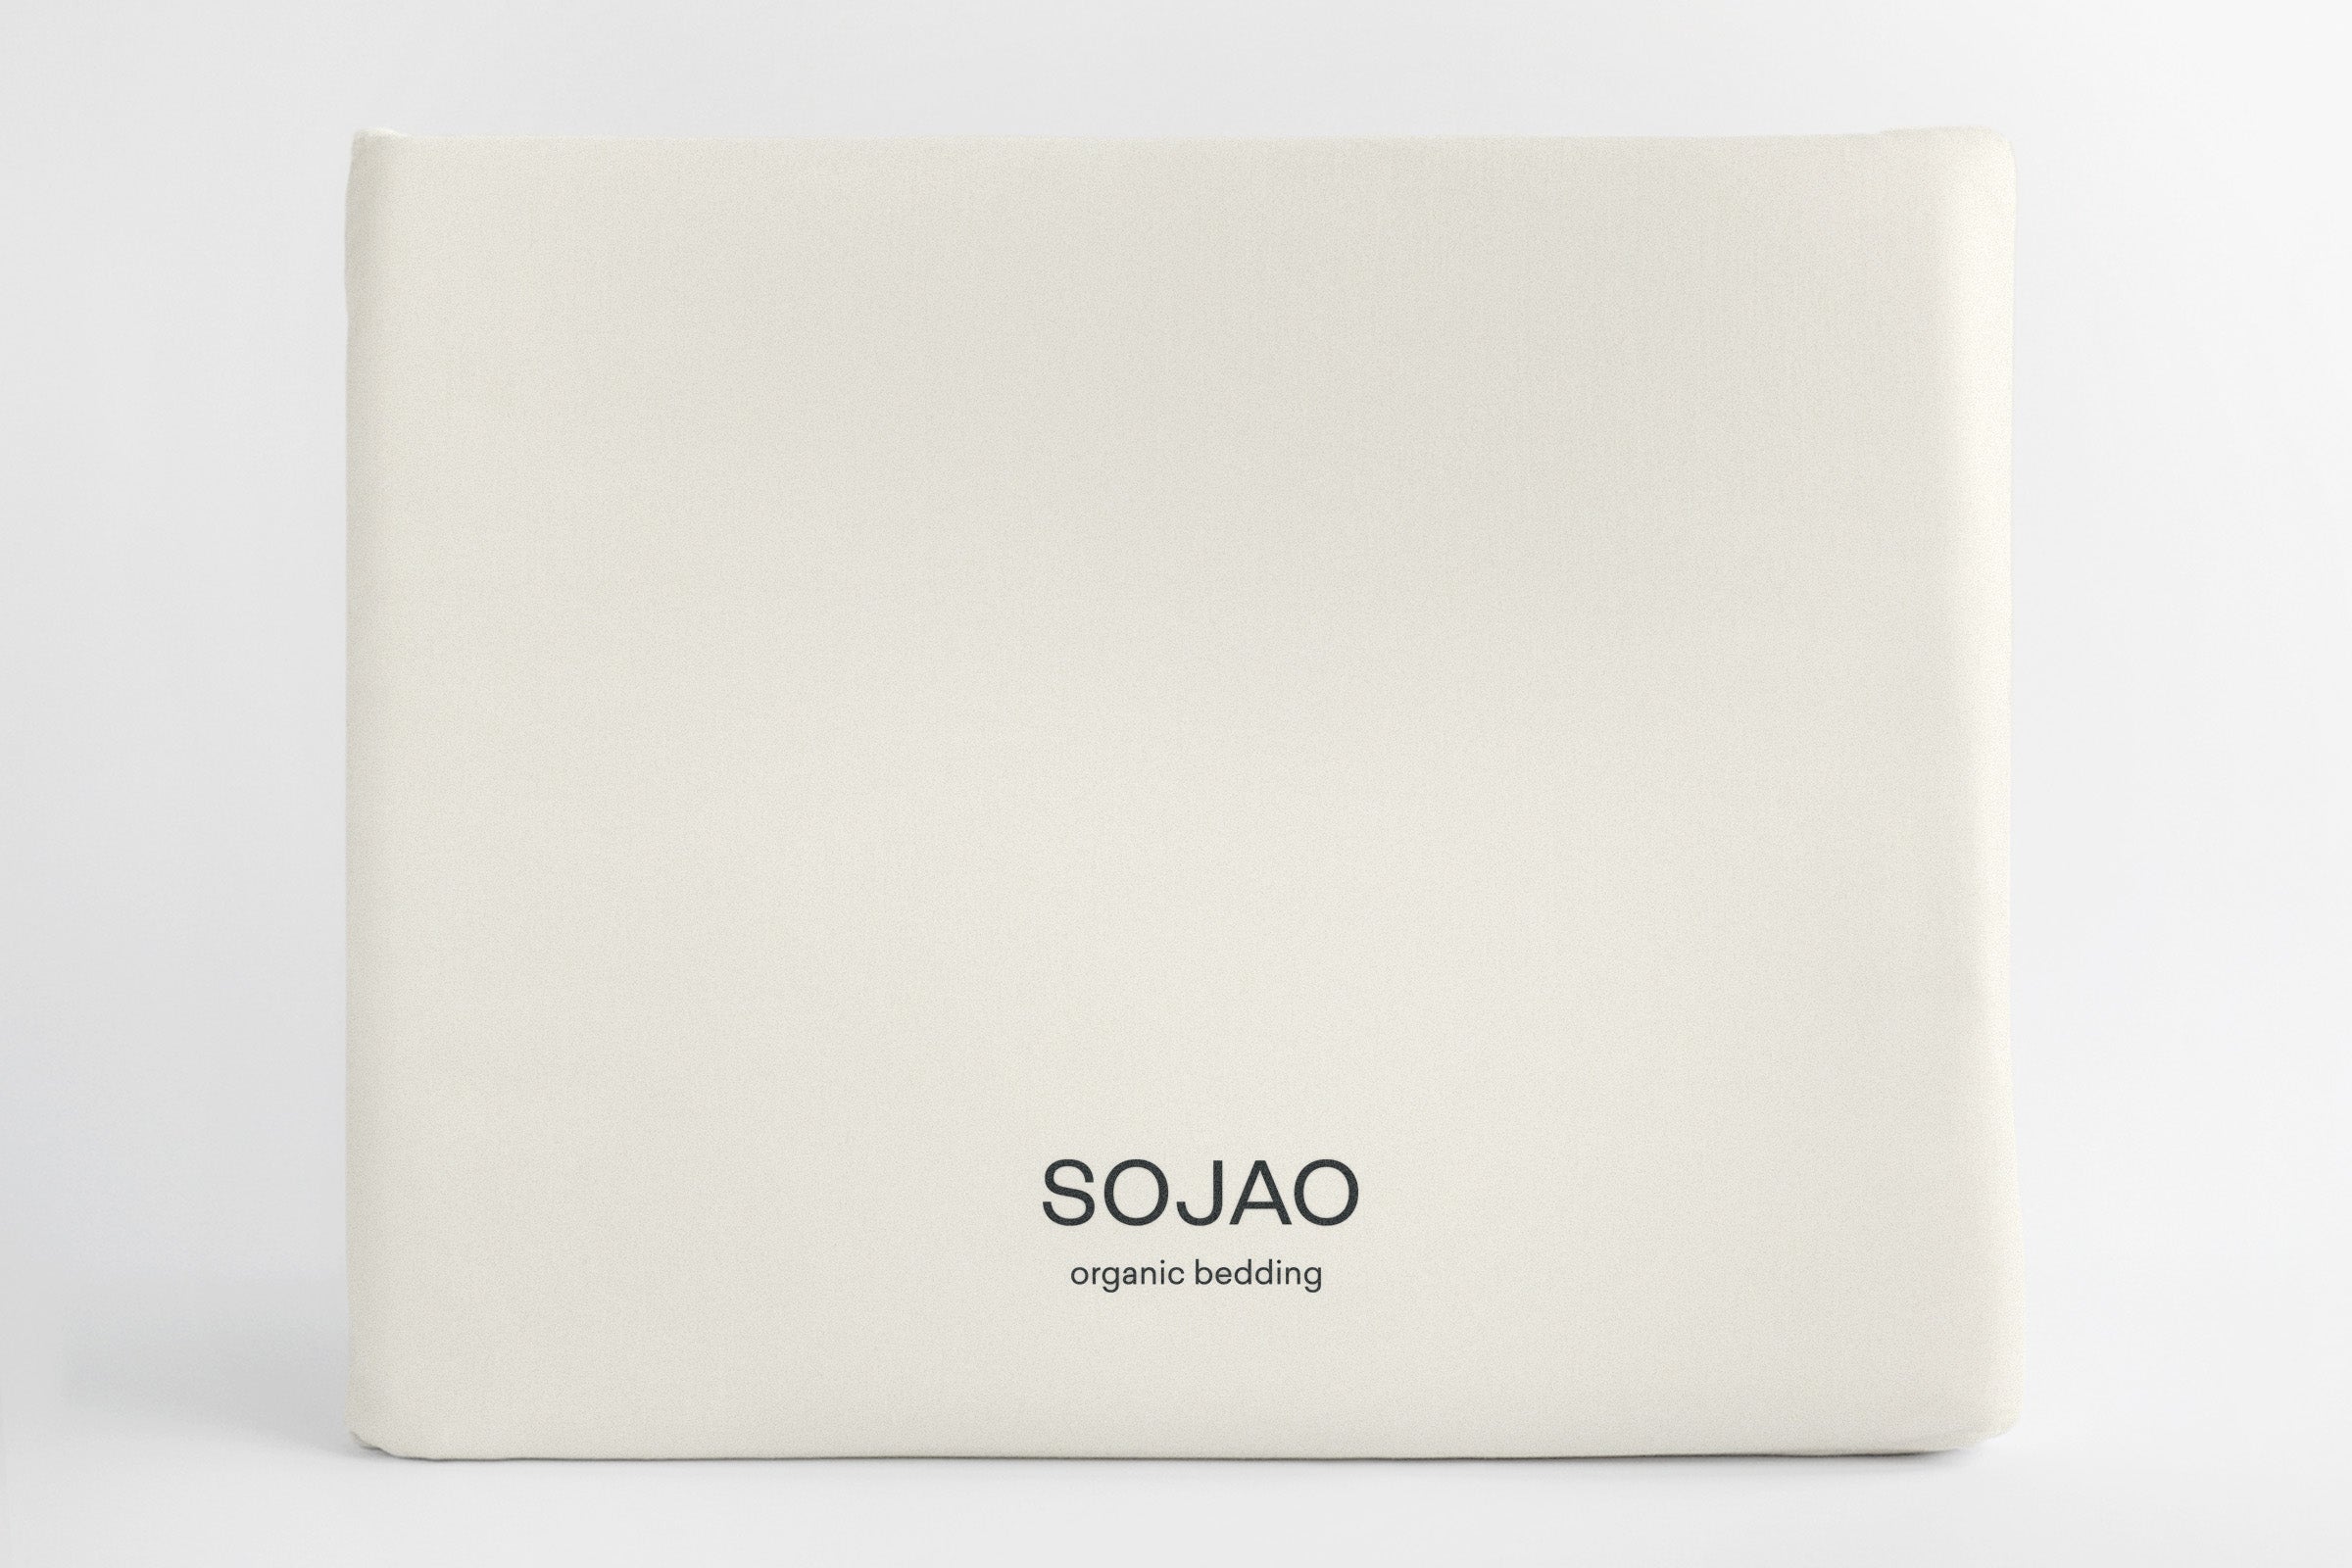 classic-natural-body-pillow-case-dust-bag-by-sojao.jpg